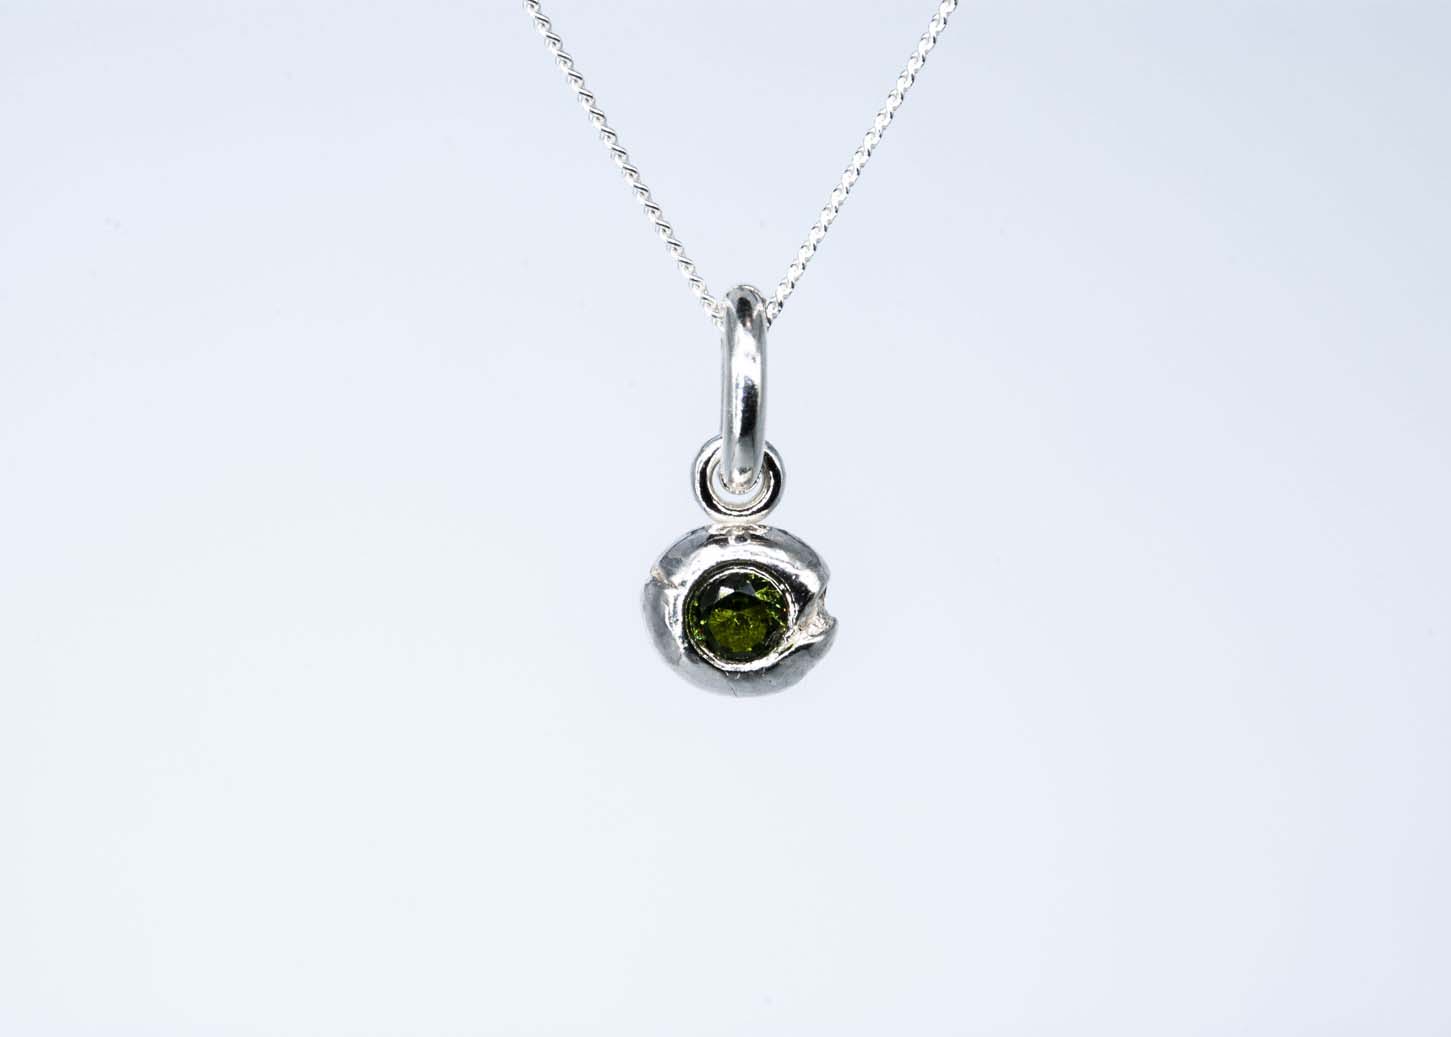 Peridot River Gem Necklace - August